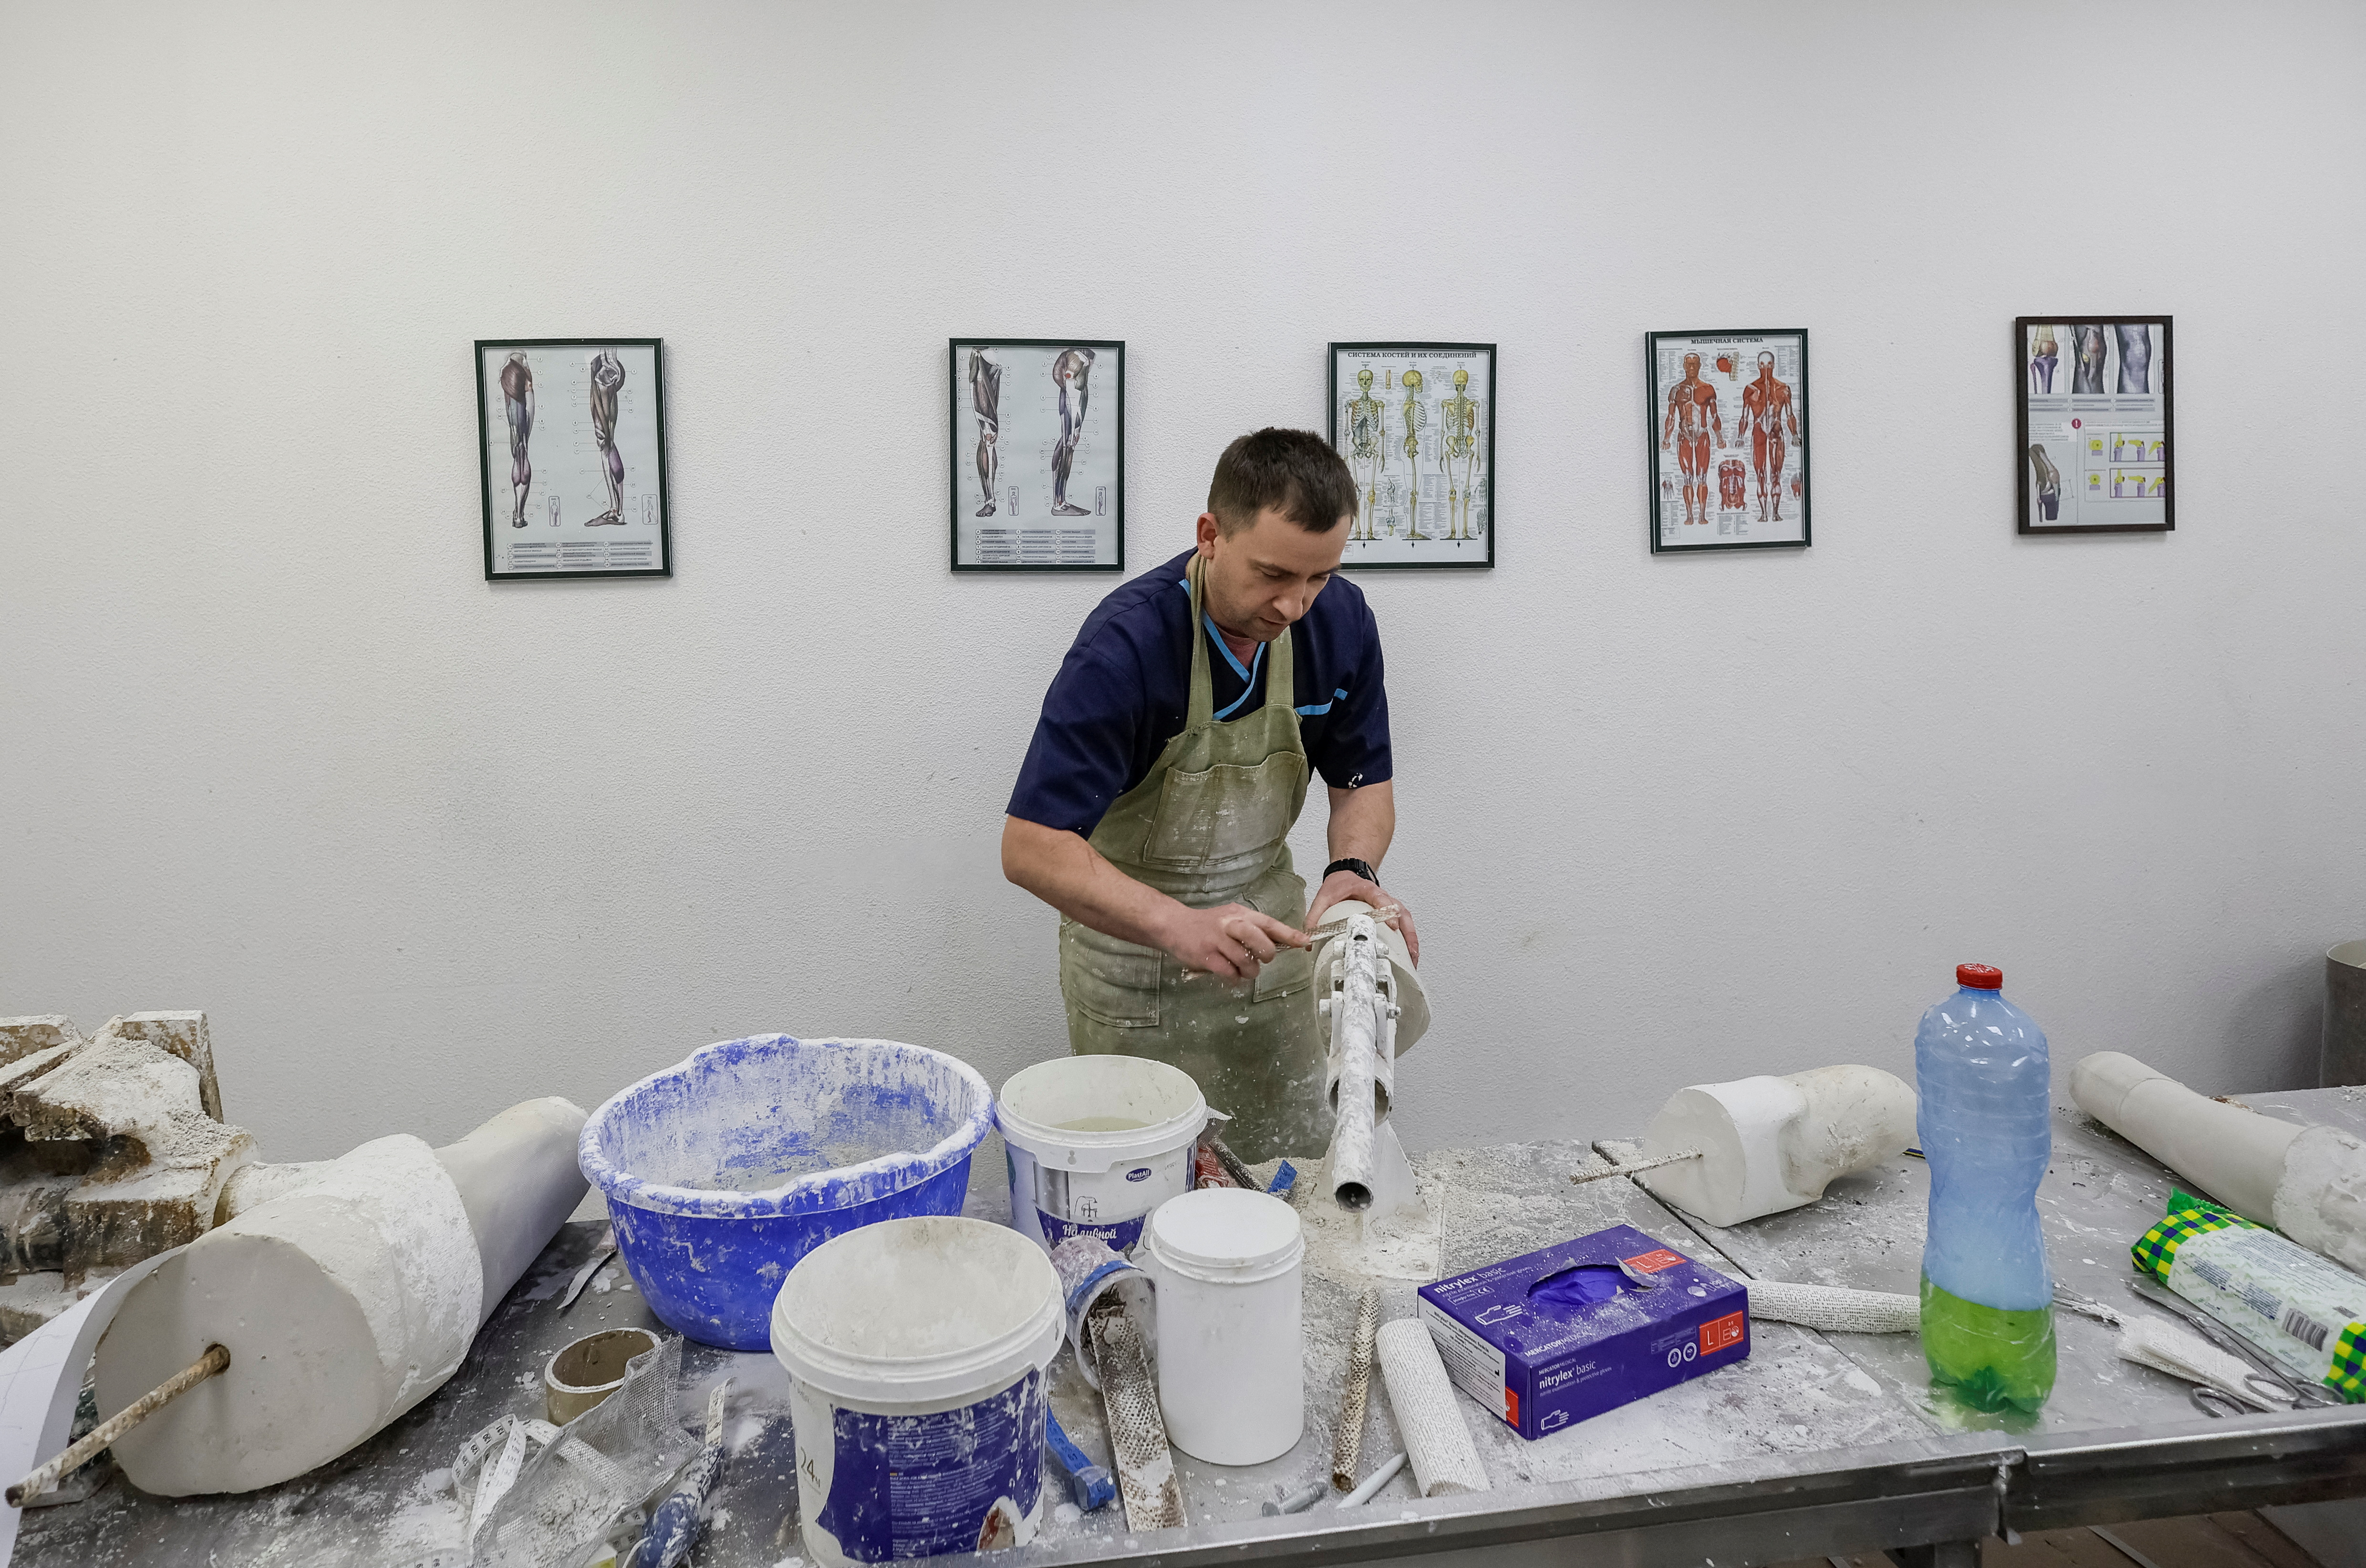 A worker makes a plaster mould for prostheses production in a prosthetics clinic in Kyiv